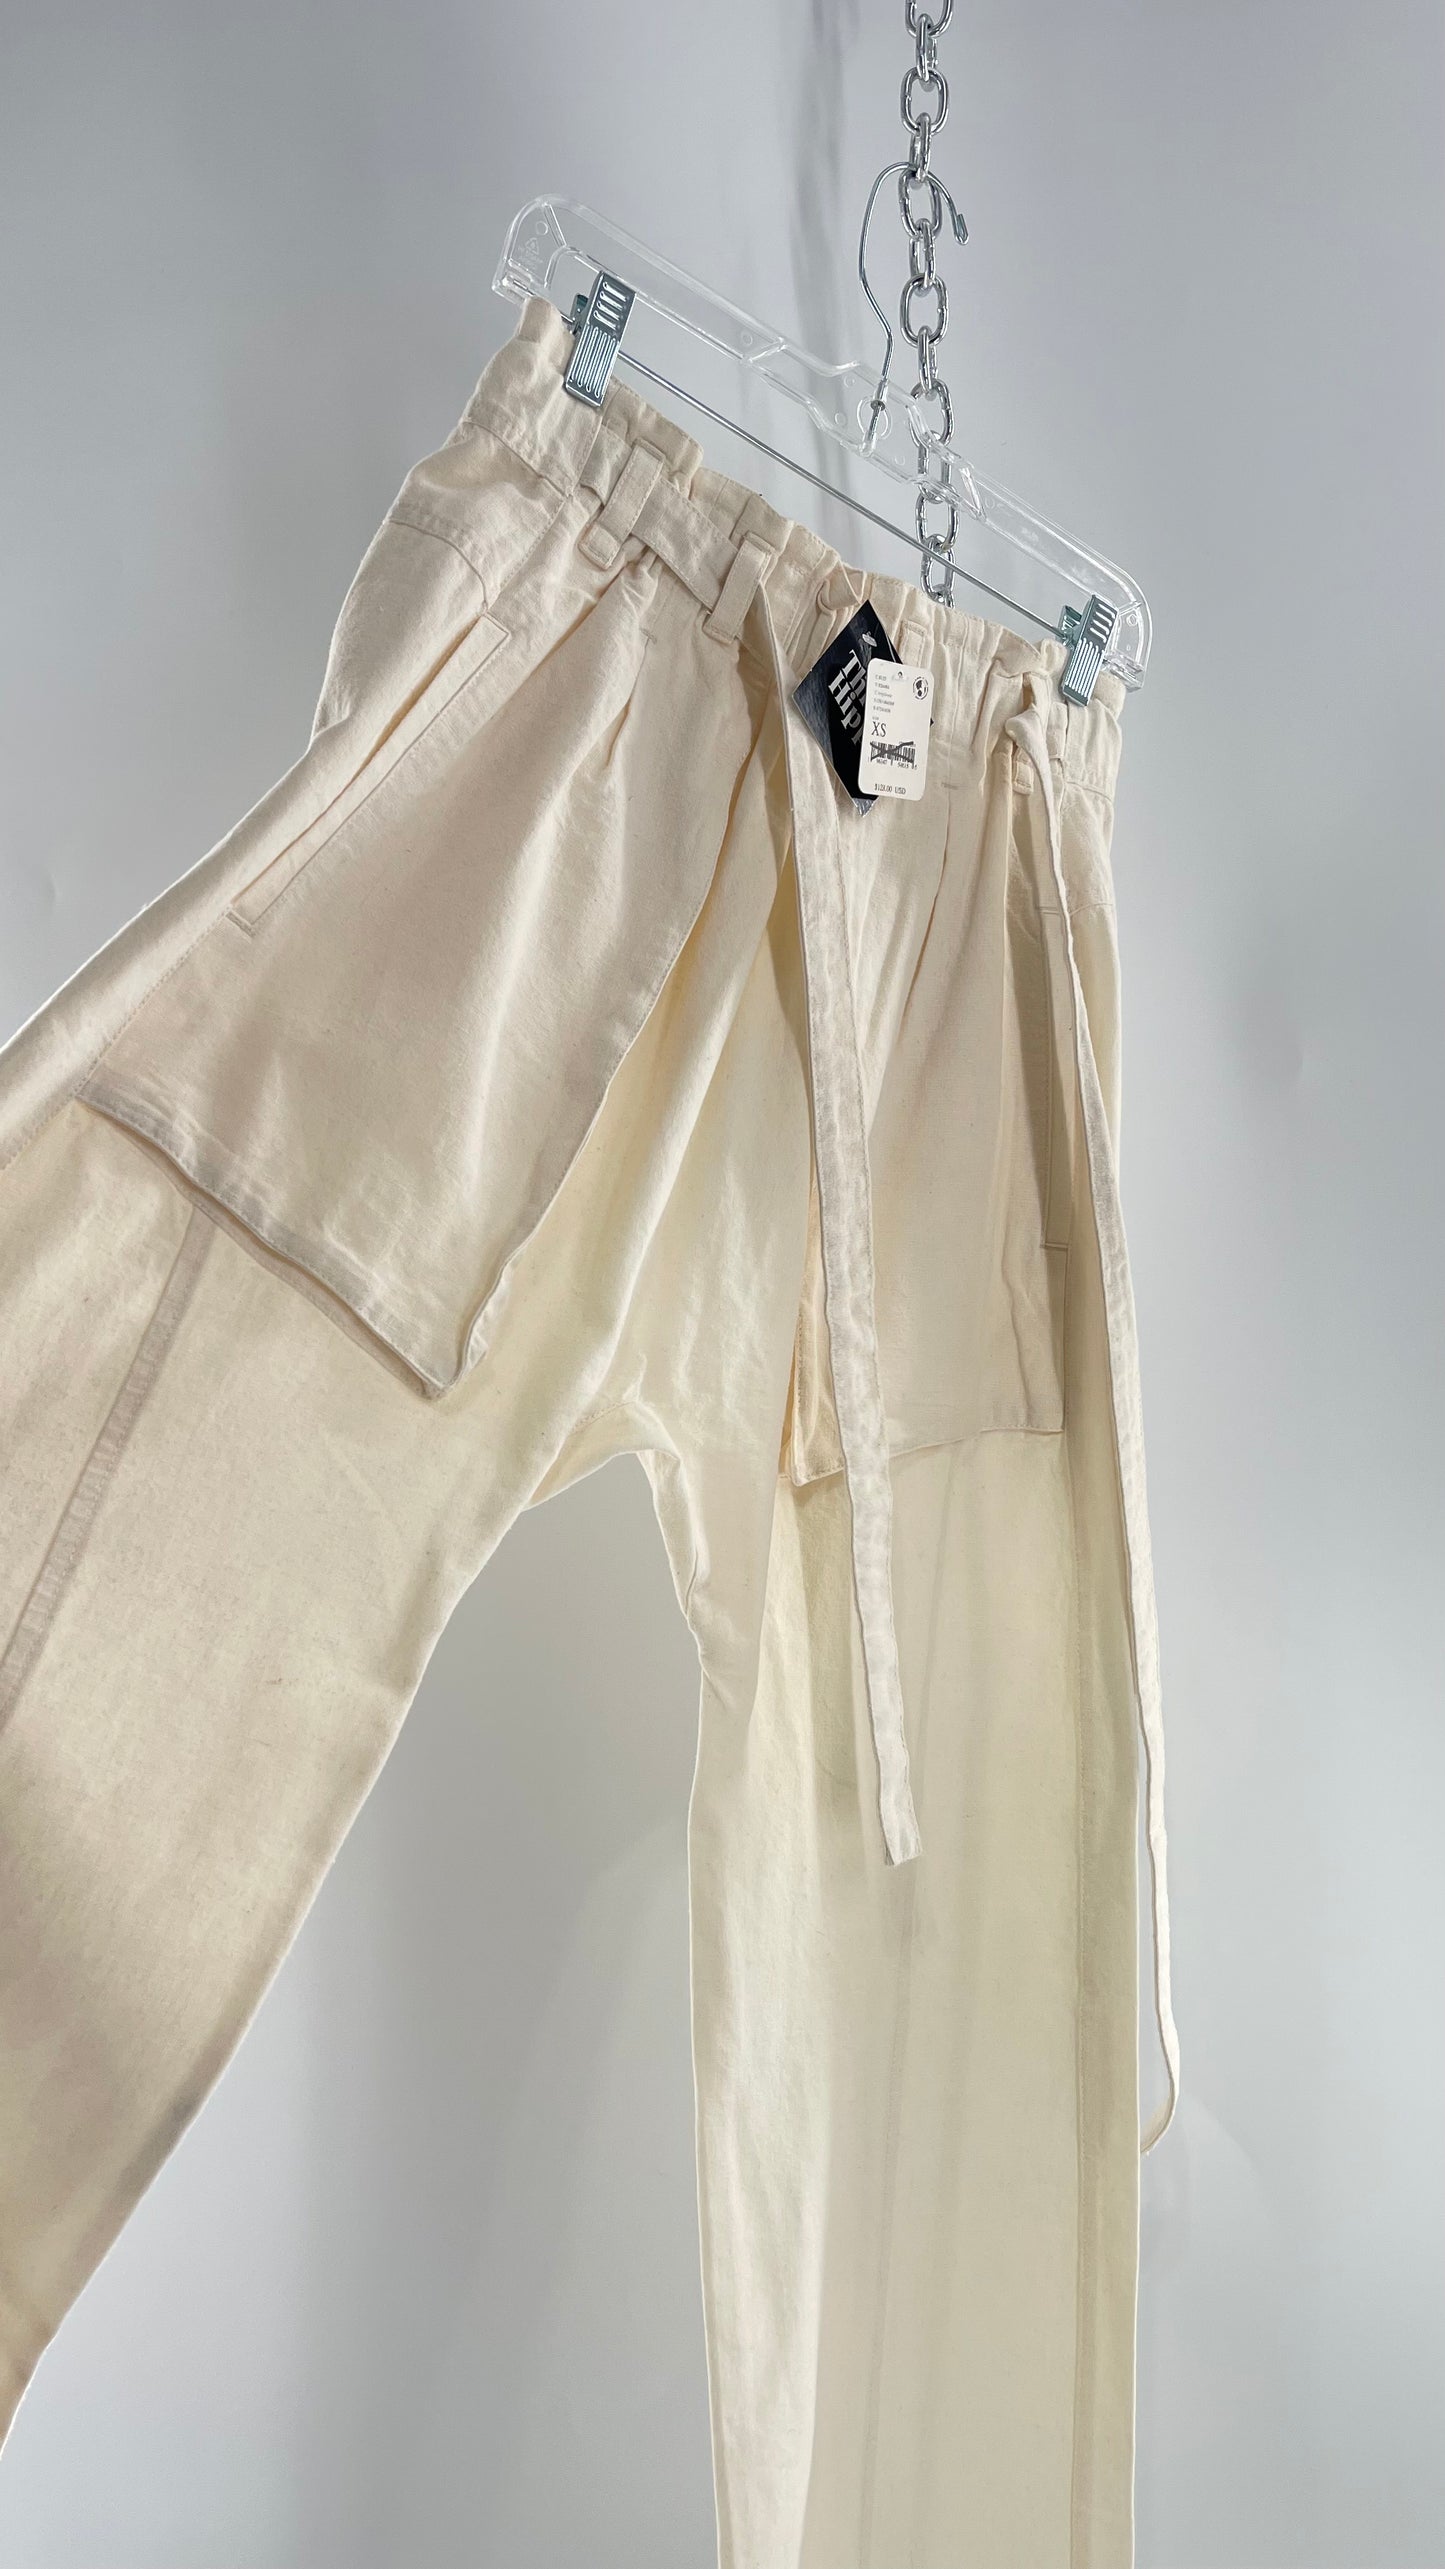 Free People Cream Color Canvas Belted Pants with Oversized Pockets and Tags Attached (XS)